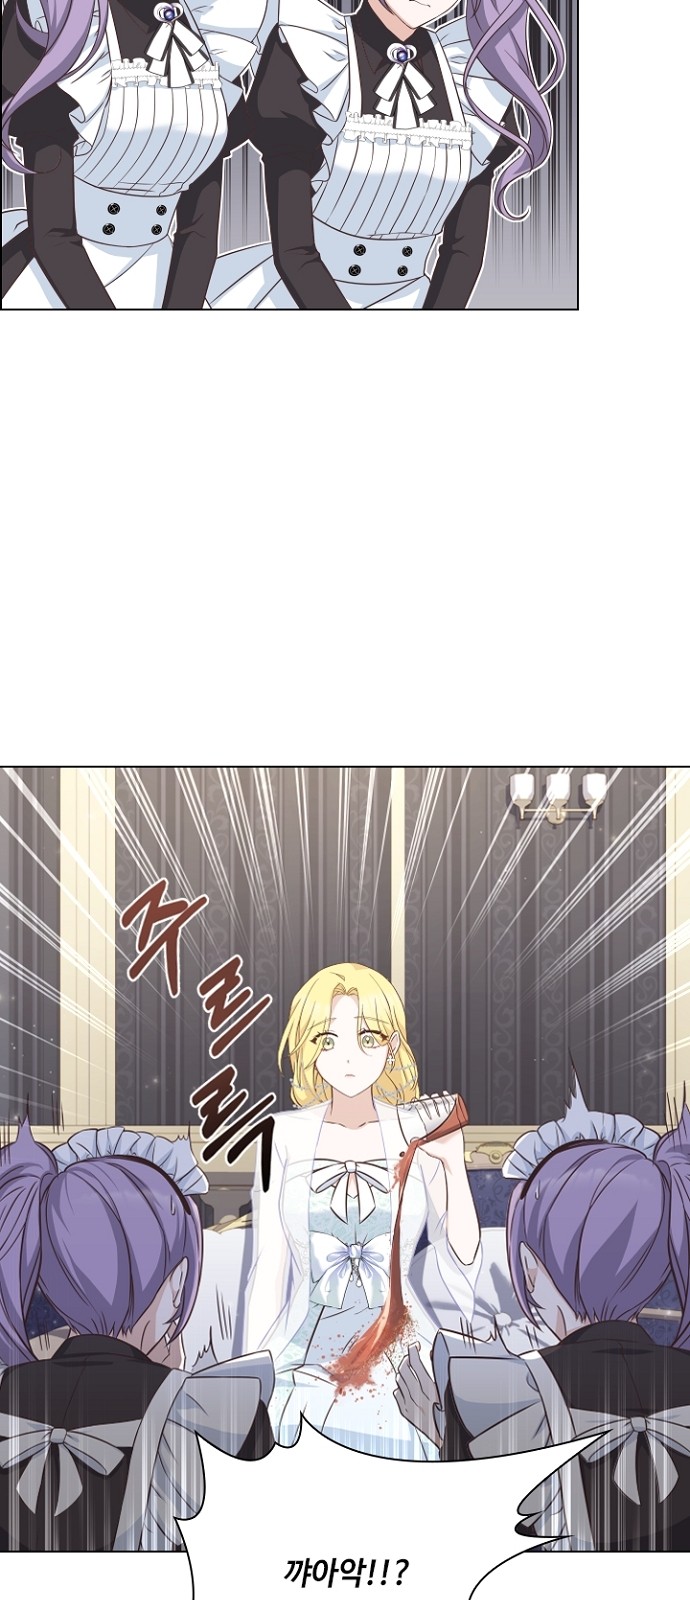 His Majesty's Proposal (A Night With the Emperor) - Chapter 37 - Page 3